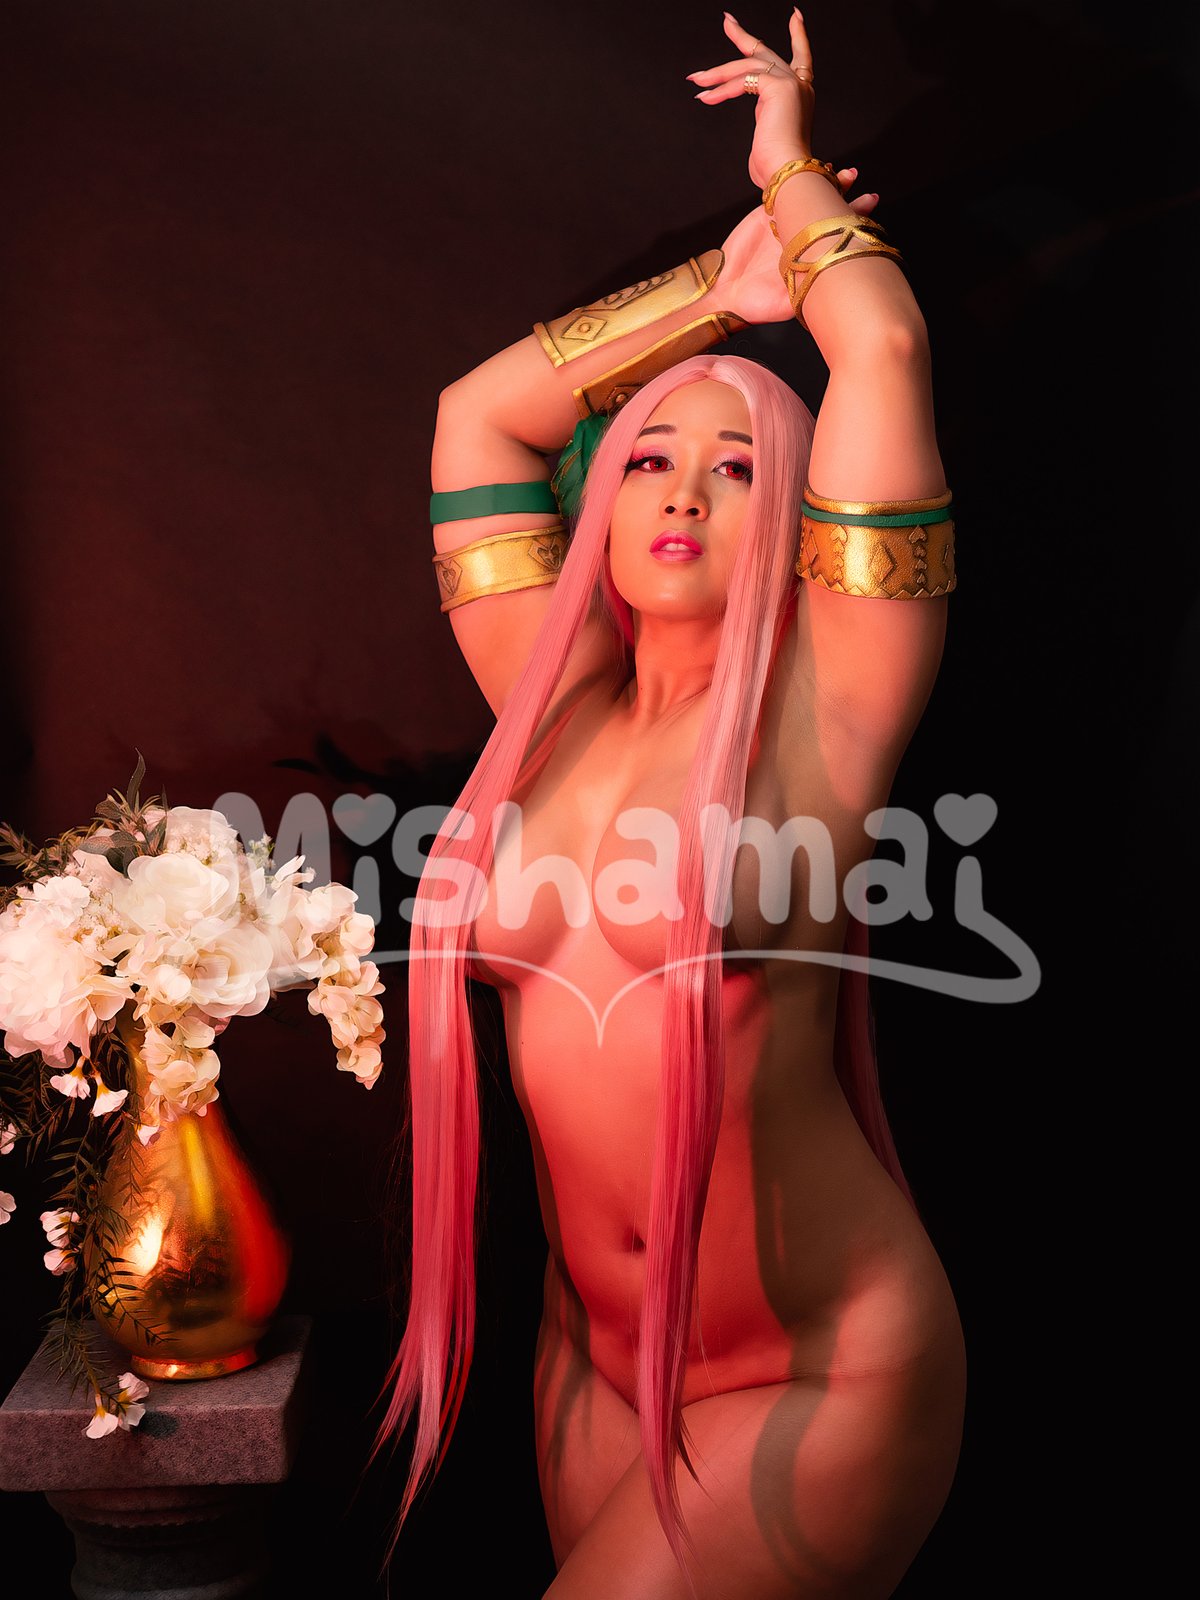 Aphrodite from Hades the Game - 8” x 10” Signed Print